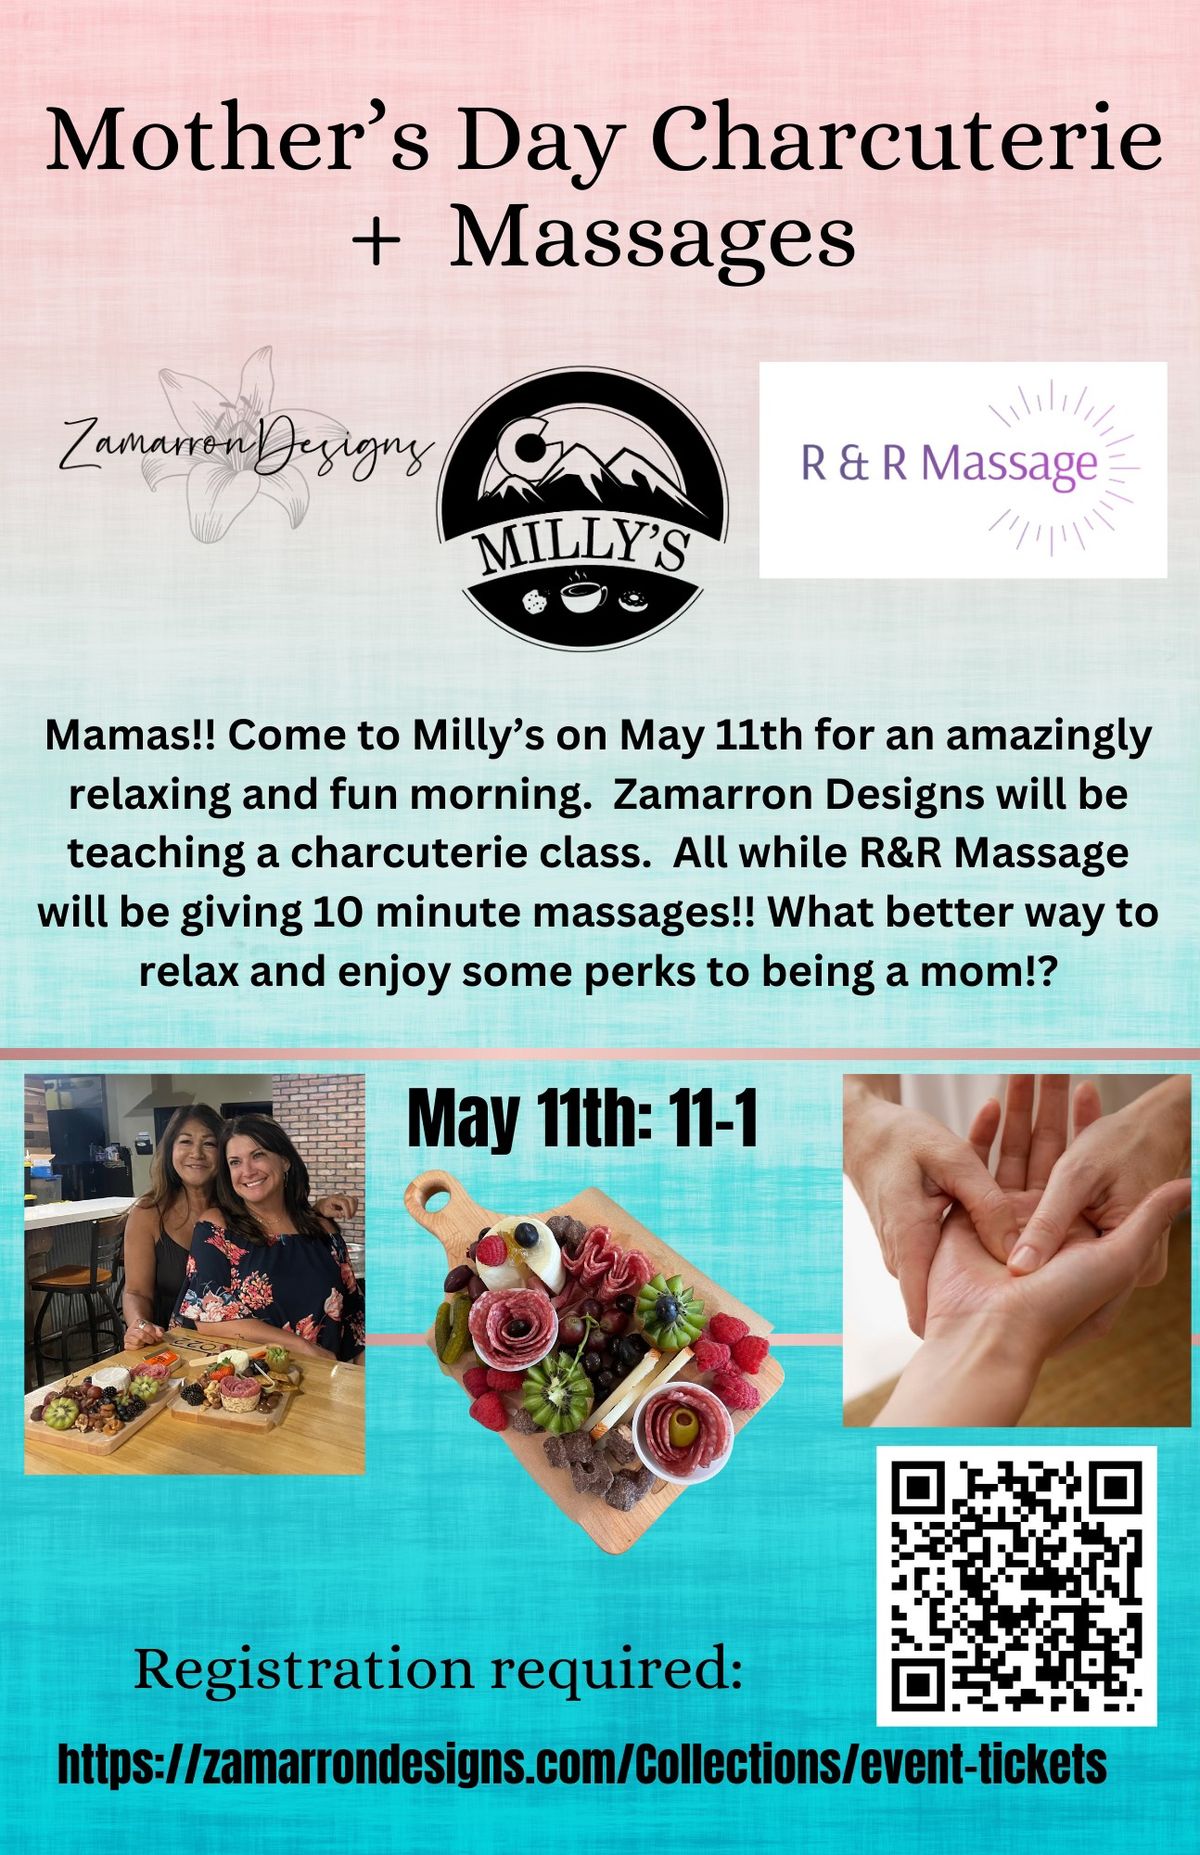 Millys Mother's Day Charcuterie + Massage